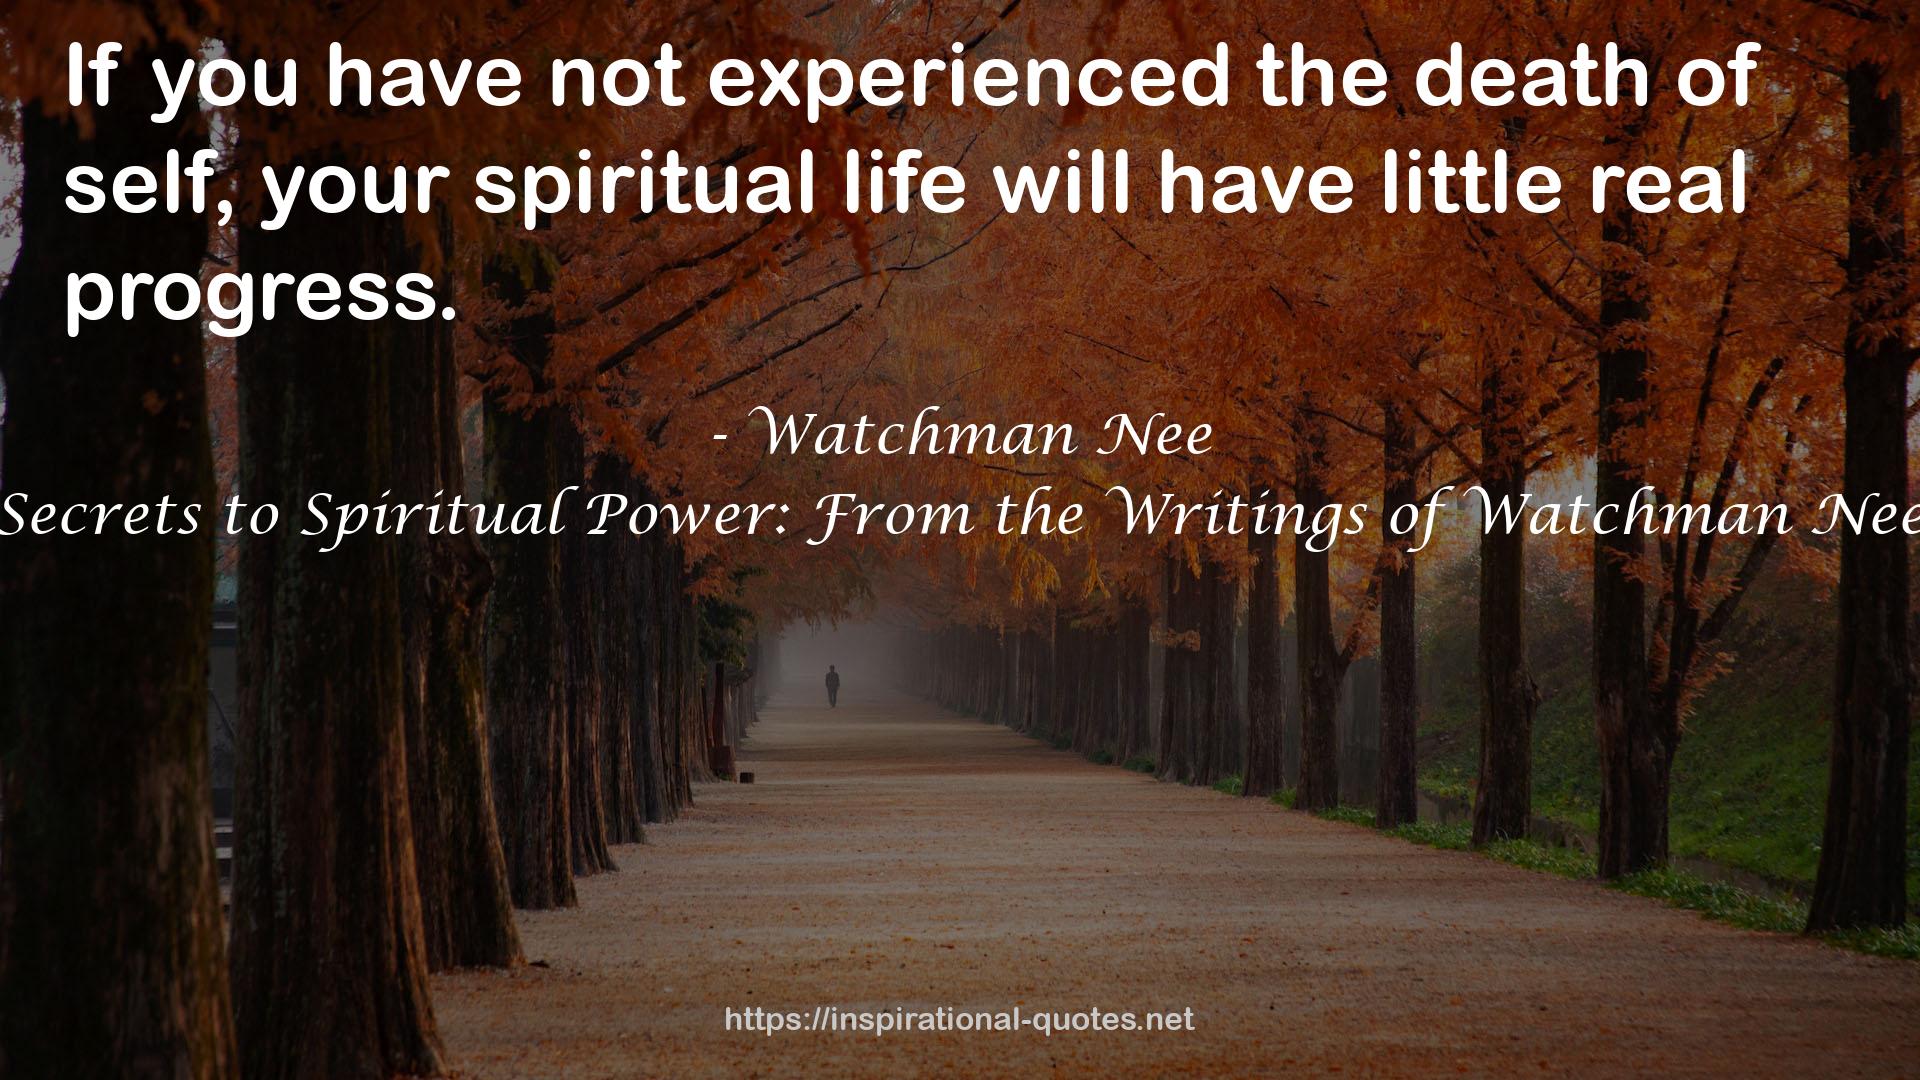 Secrets to Spiritual Power: From the Writings of Watchman Nee QUOTES